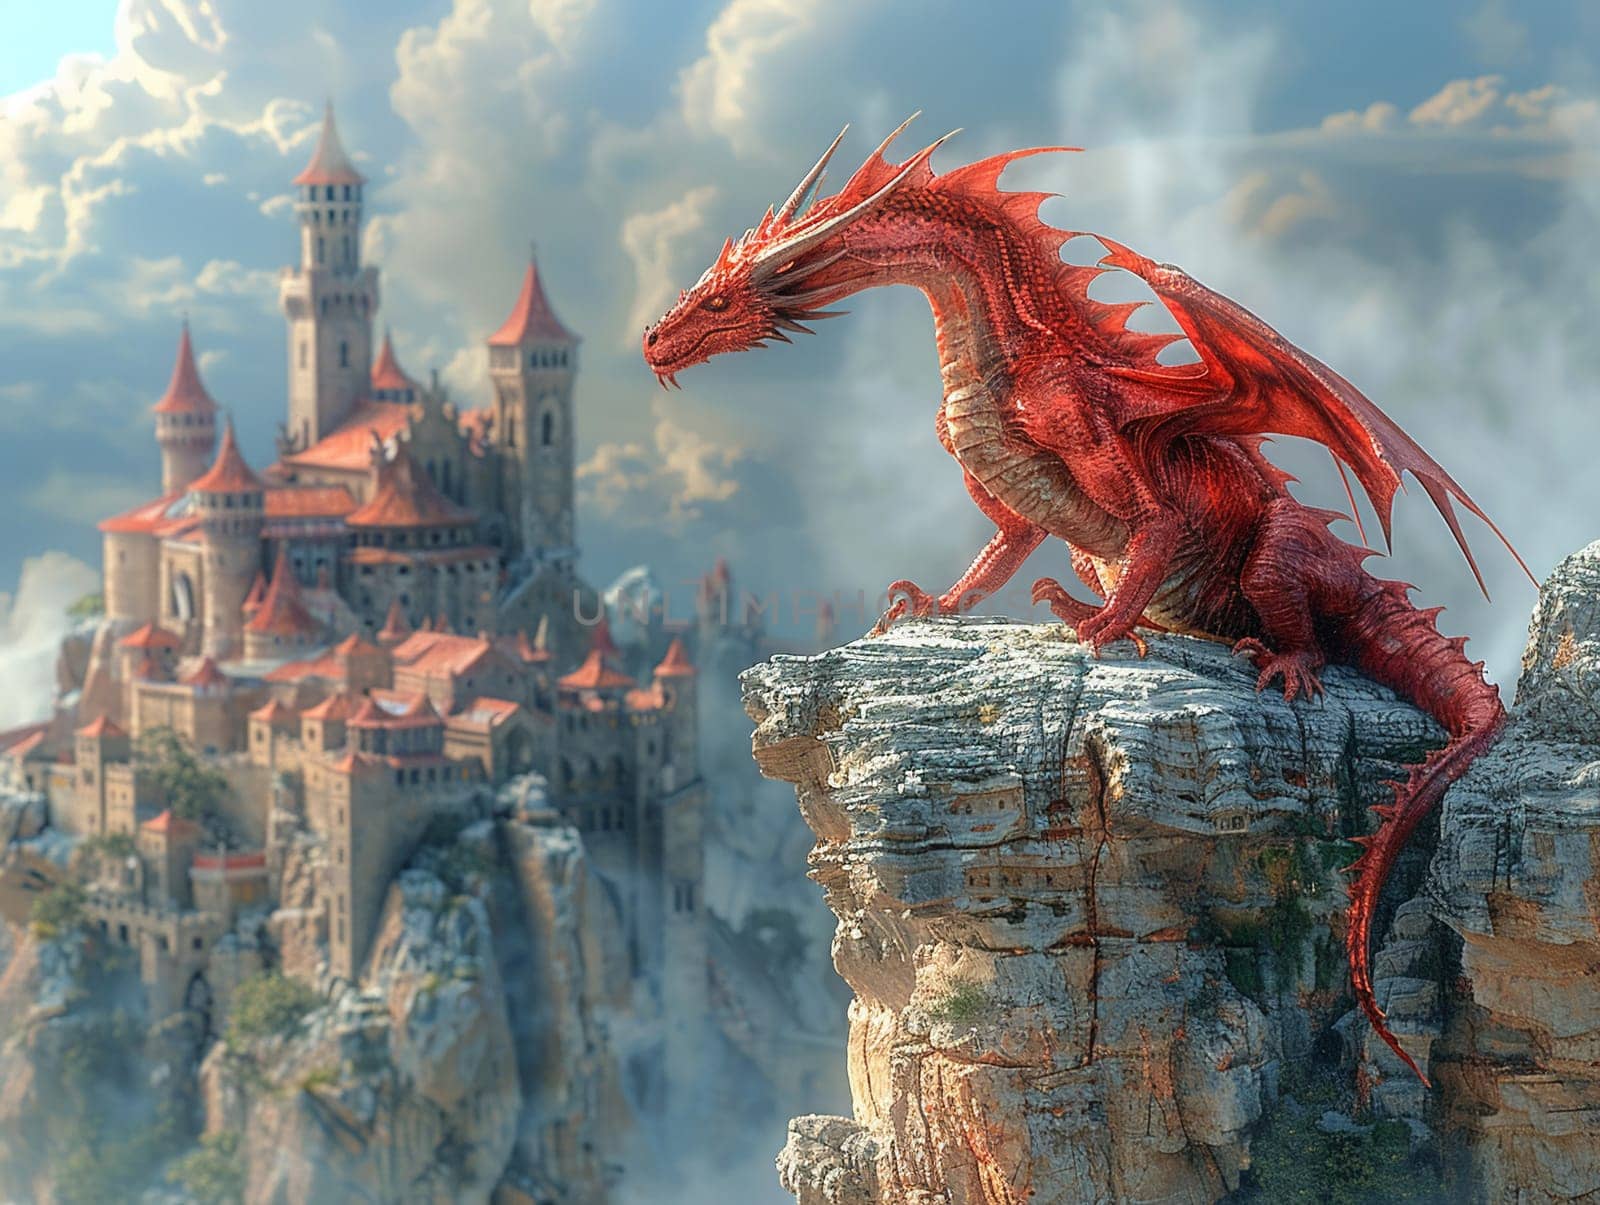 Dragon perched atop a castle, blending 3D style with traditional fantasy illustration.